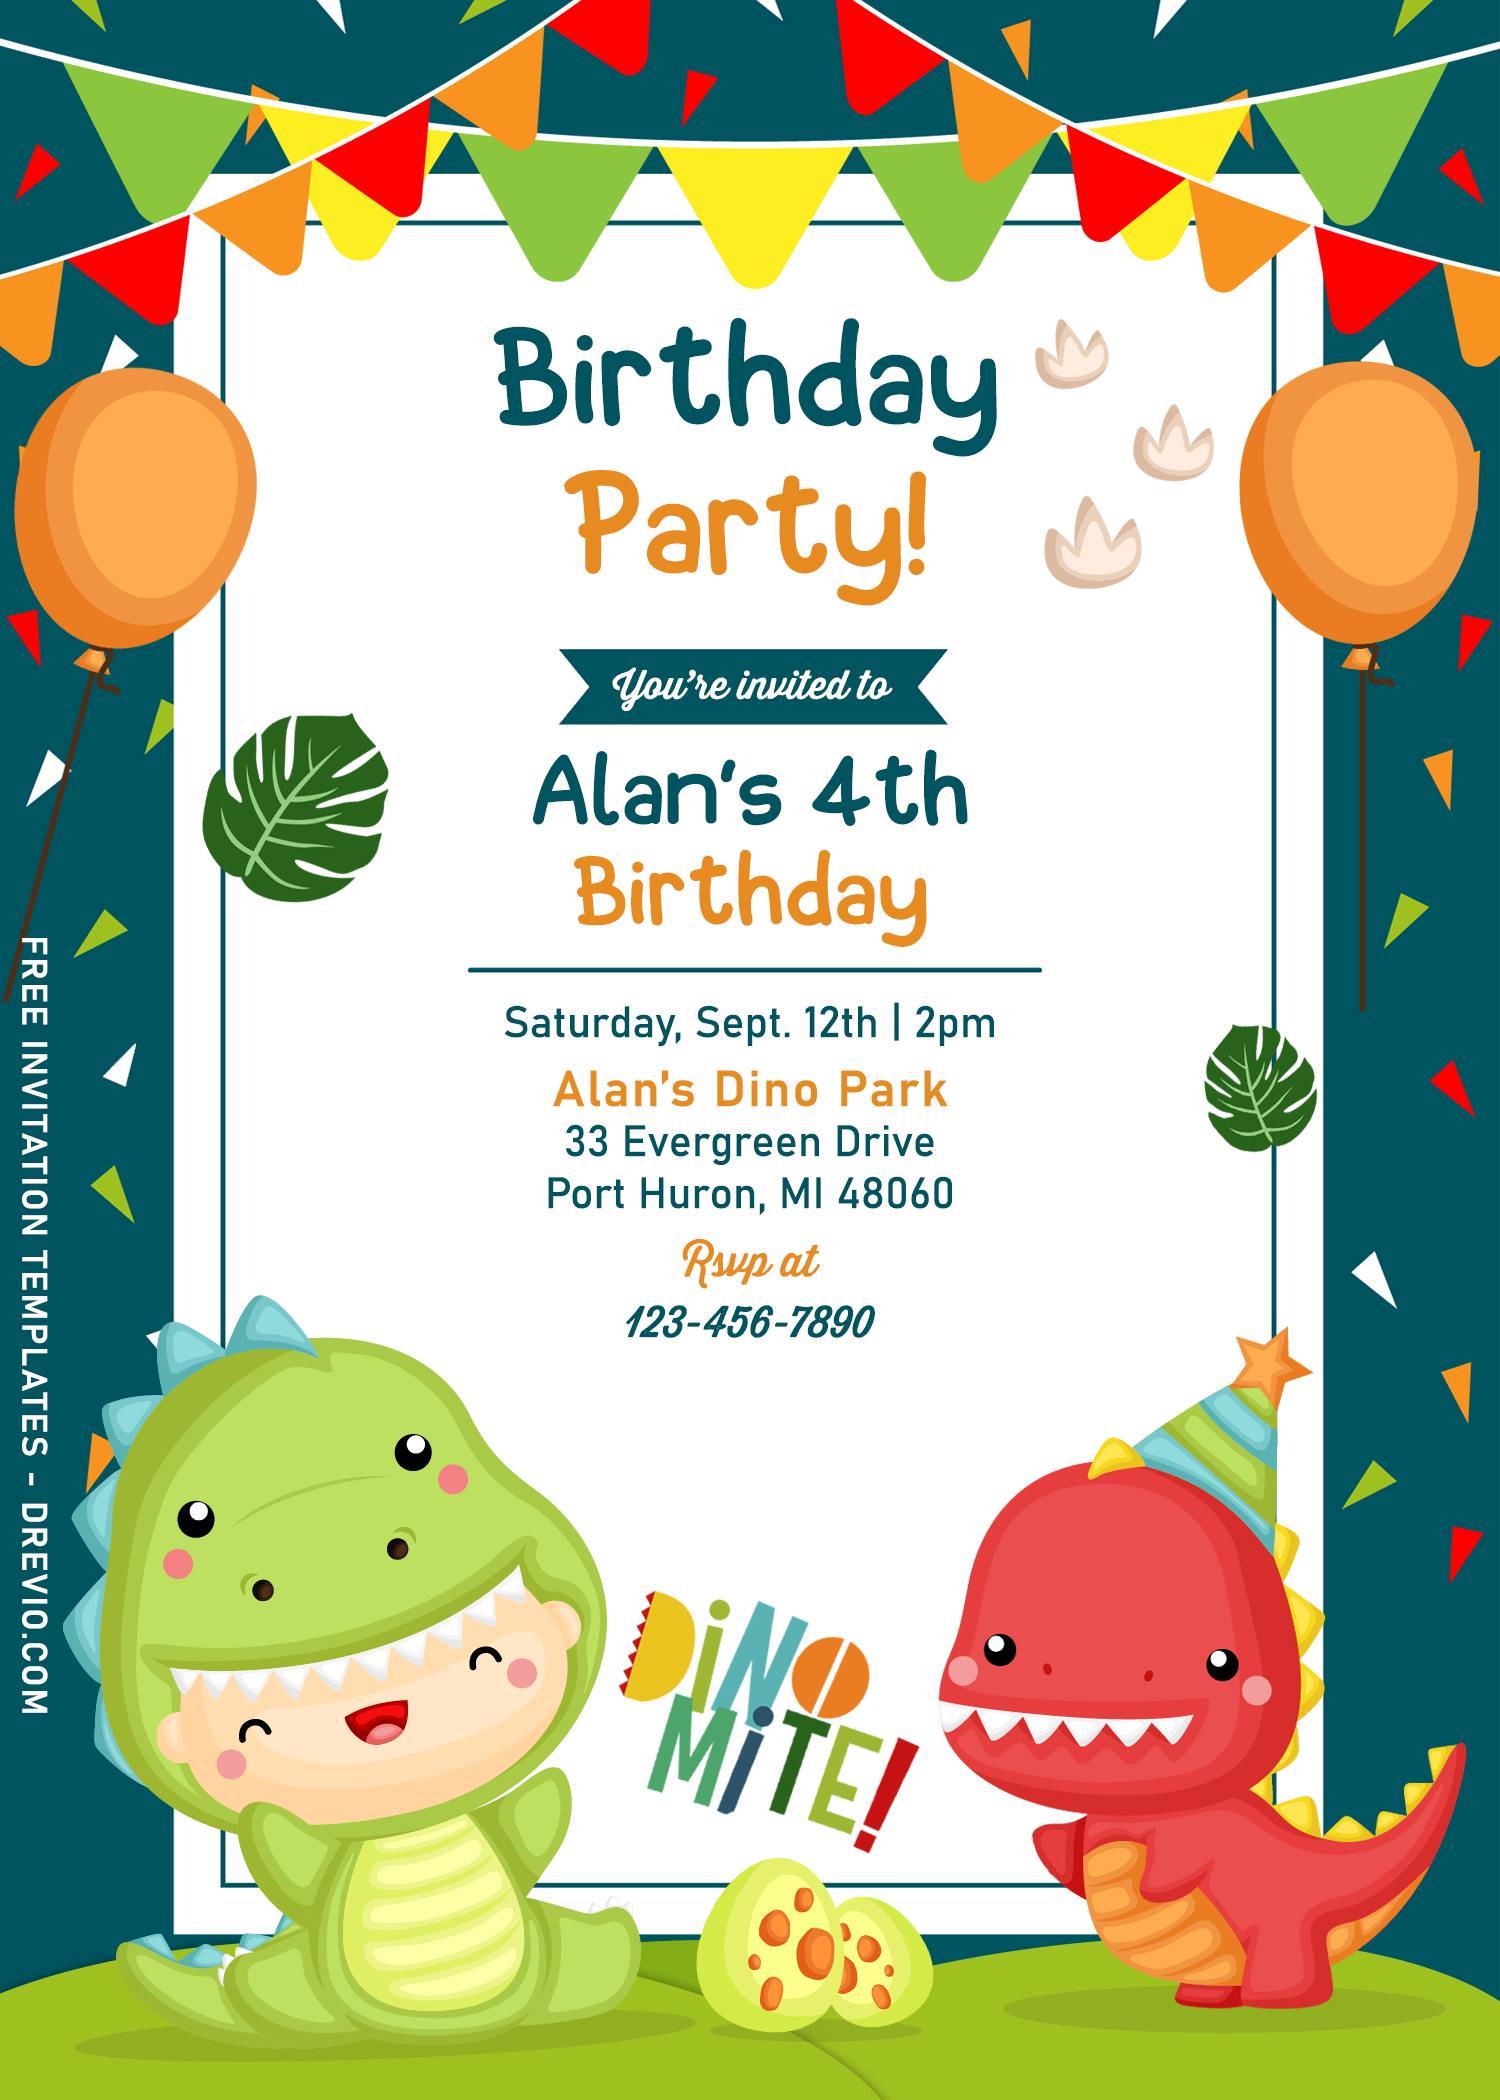 Birthday Invitation Card Template For Twins - Printable Templates Free